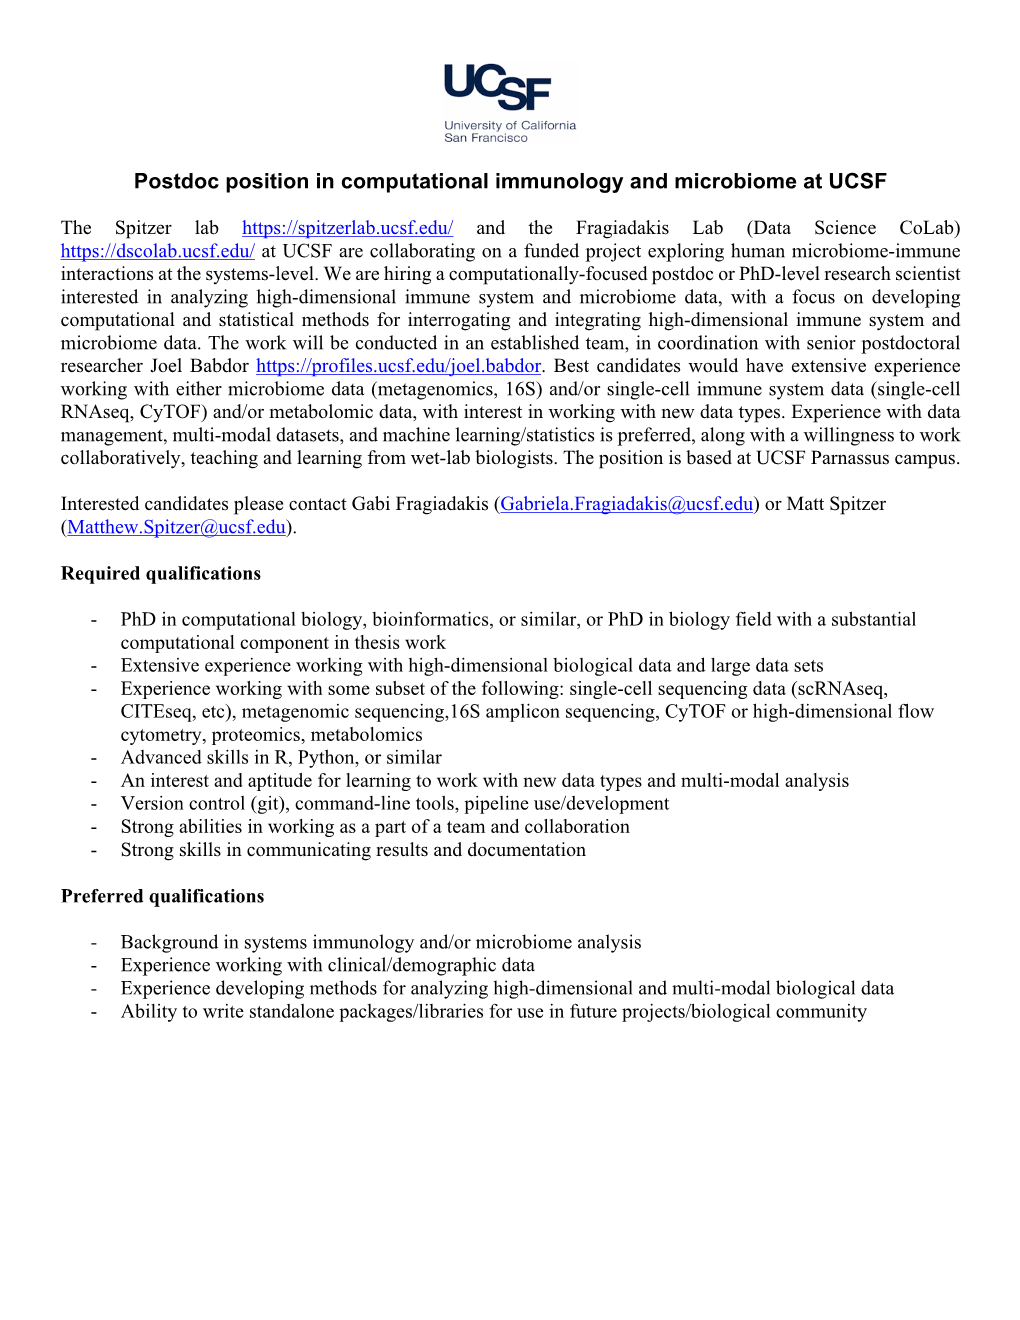 Postdoc Position in Computational Immunology and Microbiome at UCSF